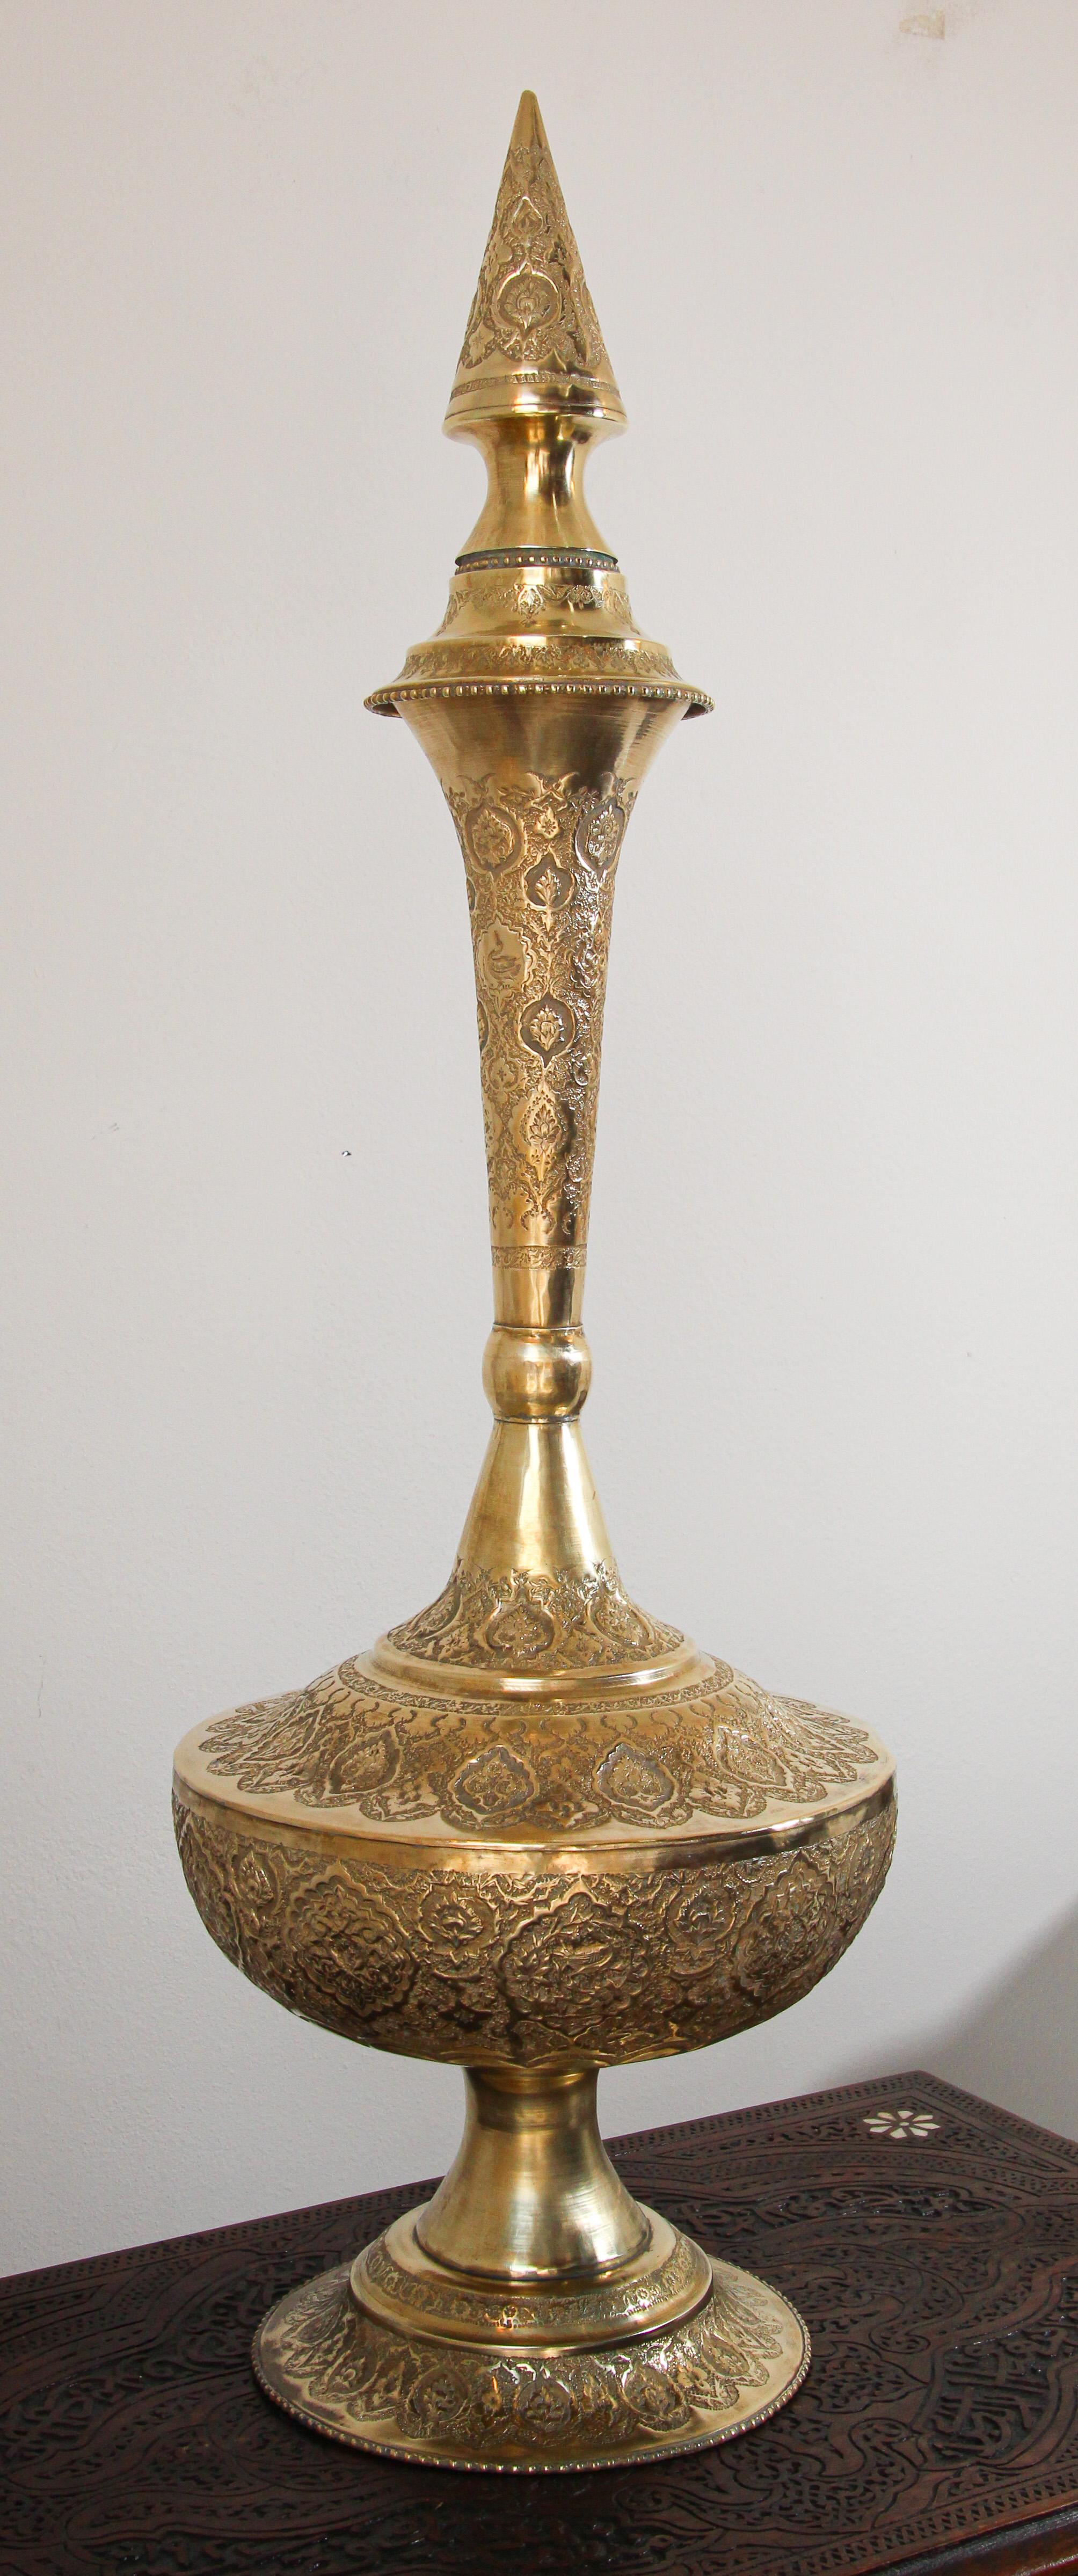 A late-19th century Mughal Indian oversized Mughal Indian brass bottle urn.
A sleek, elegant brass vessel, fluted neck, with cap. 
Lucknow circa 1860 Raj period, of globular form with a tall tapering neck with chased design all upon a collet foot.